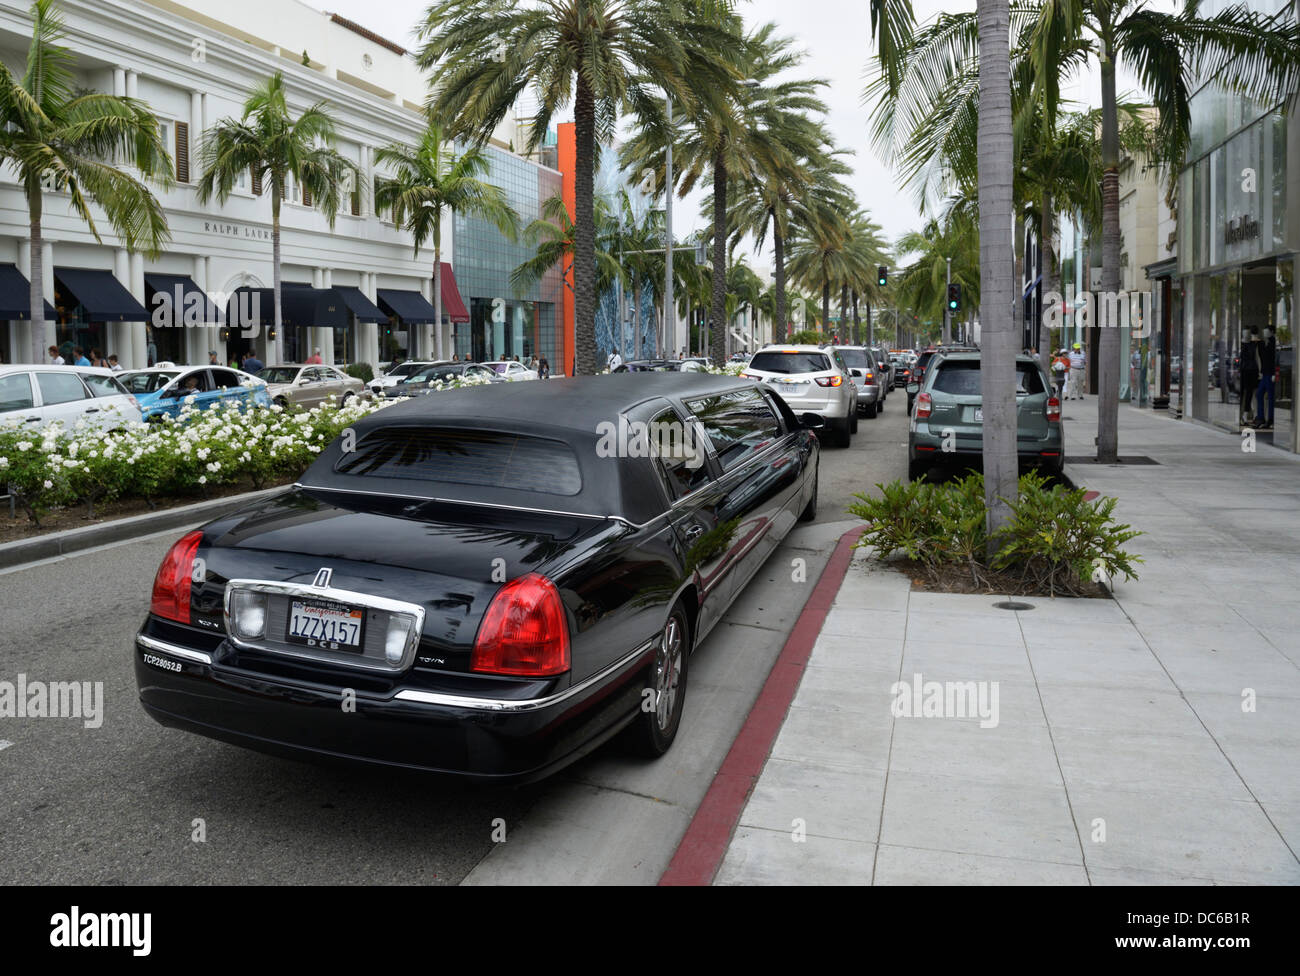 Limousine, Rodeo Drive, Beverly Hills, CA Stock Photo